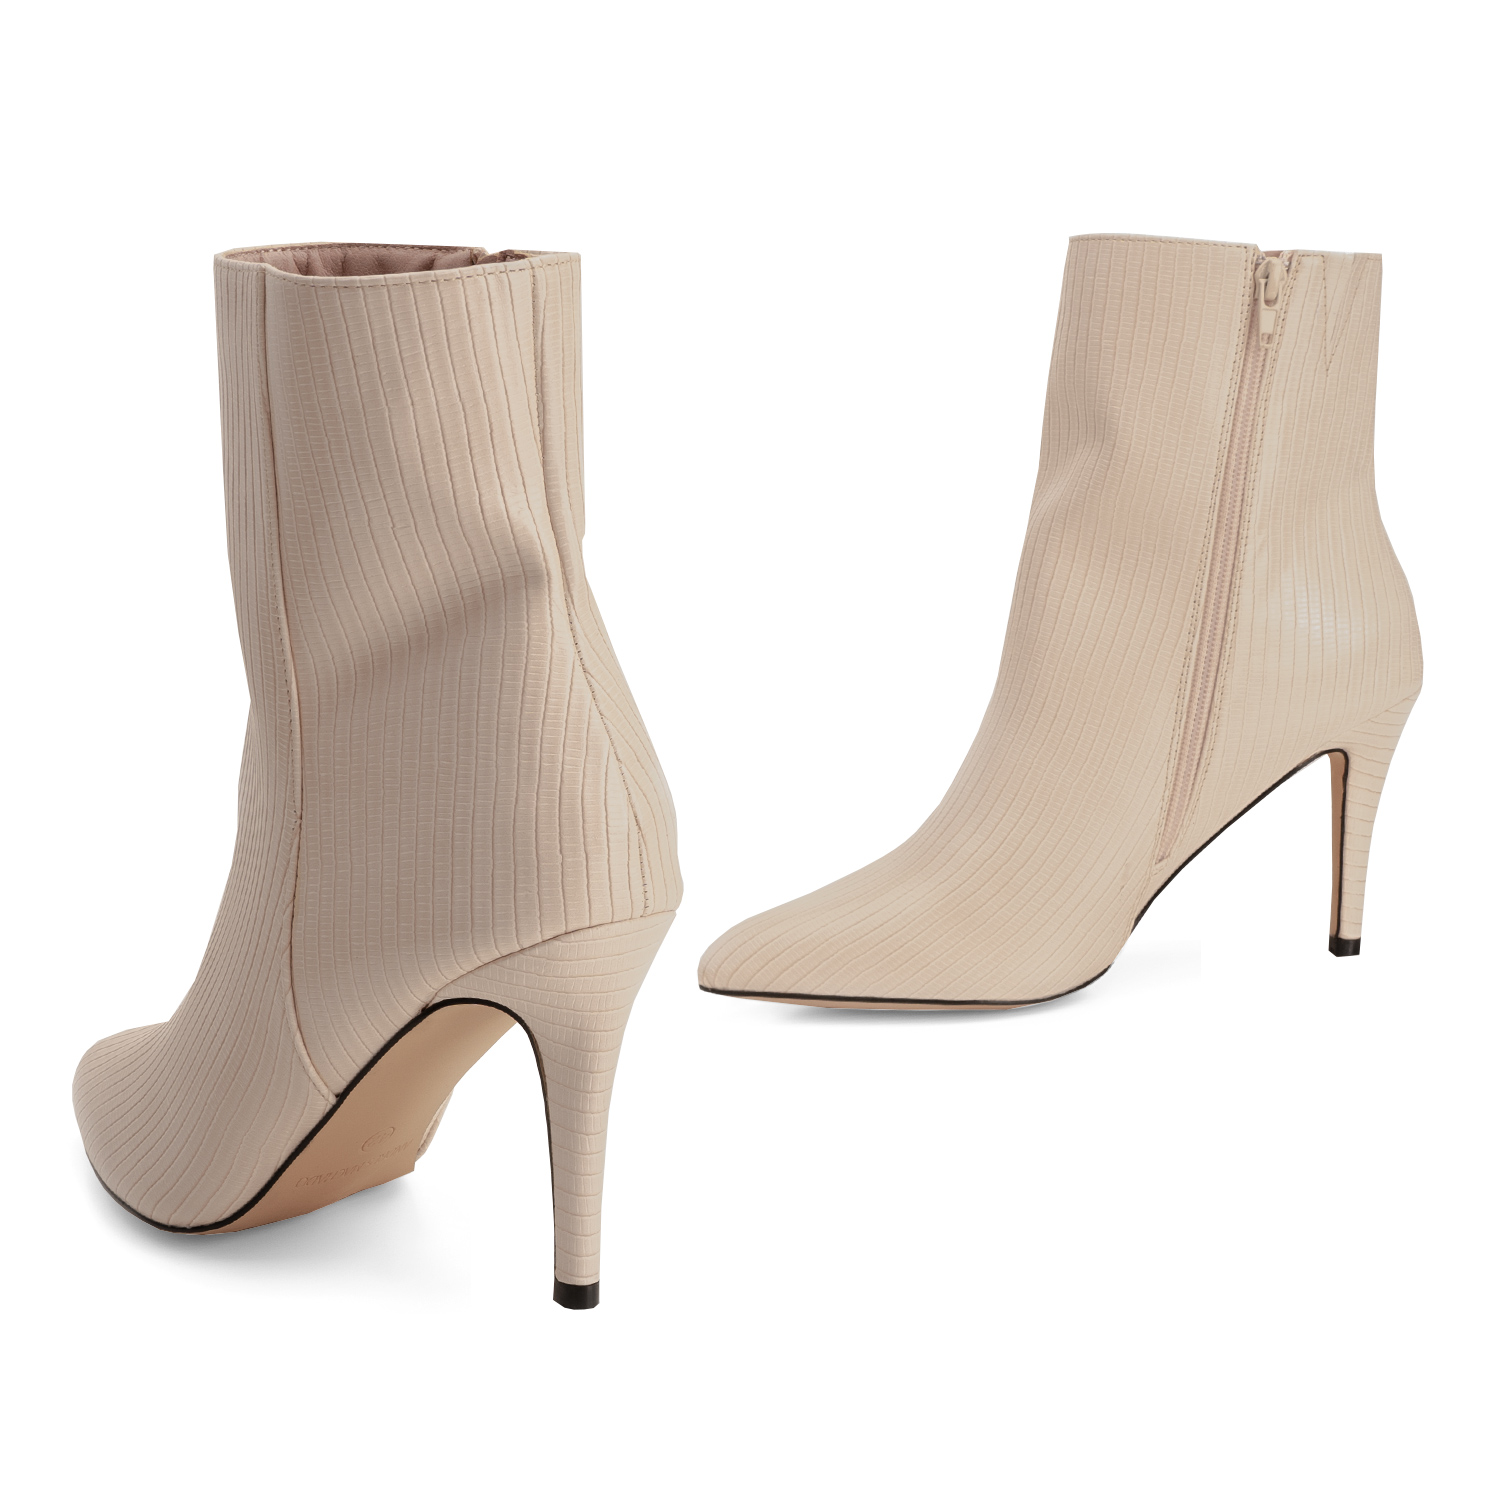 Pointed toed booties in ivory embossed faux leather 